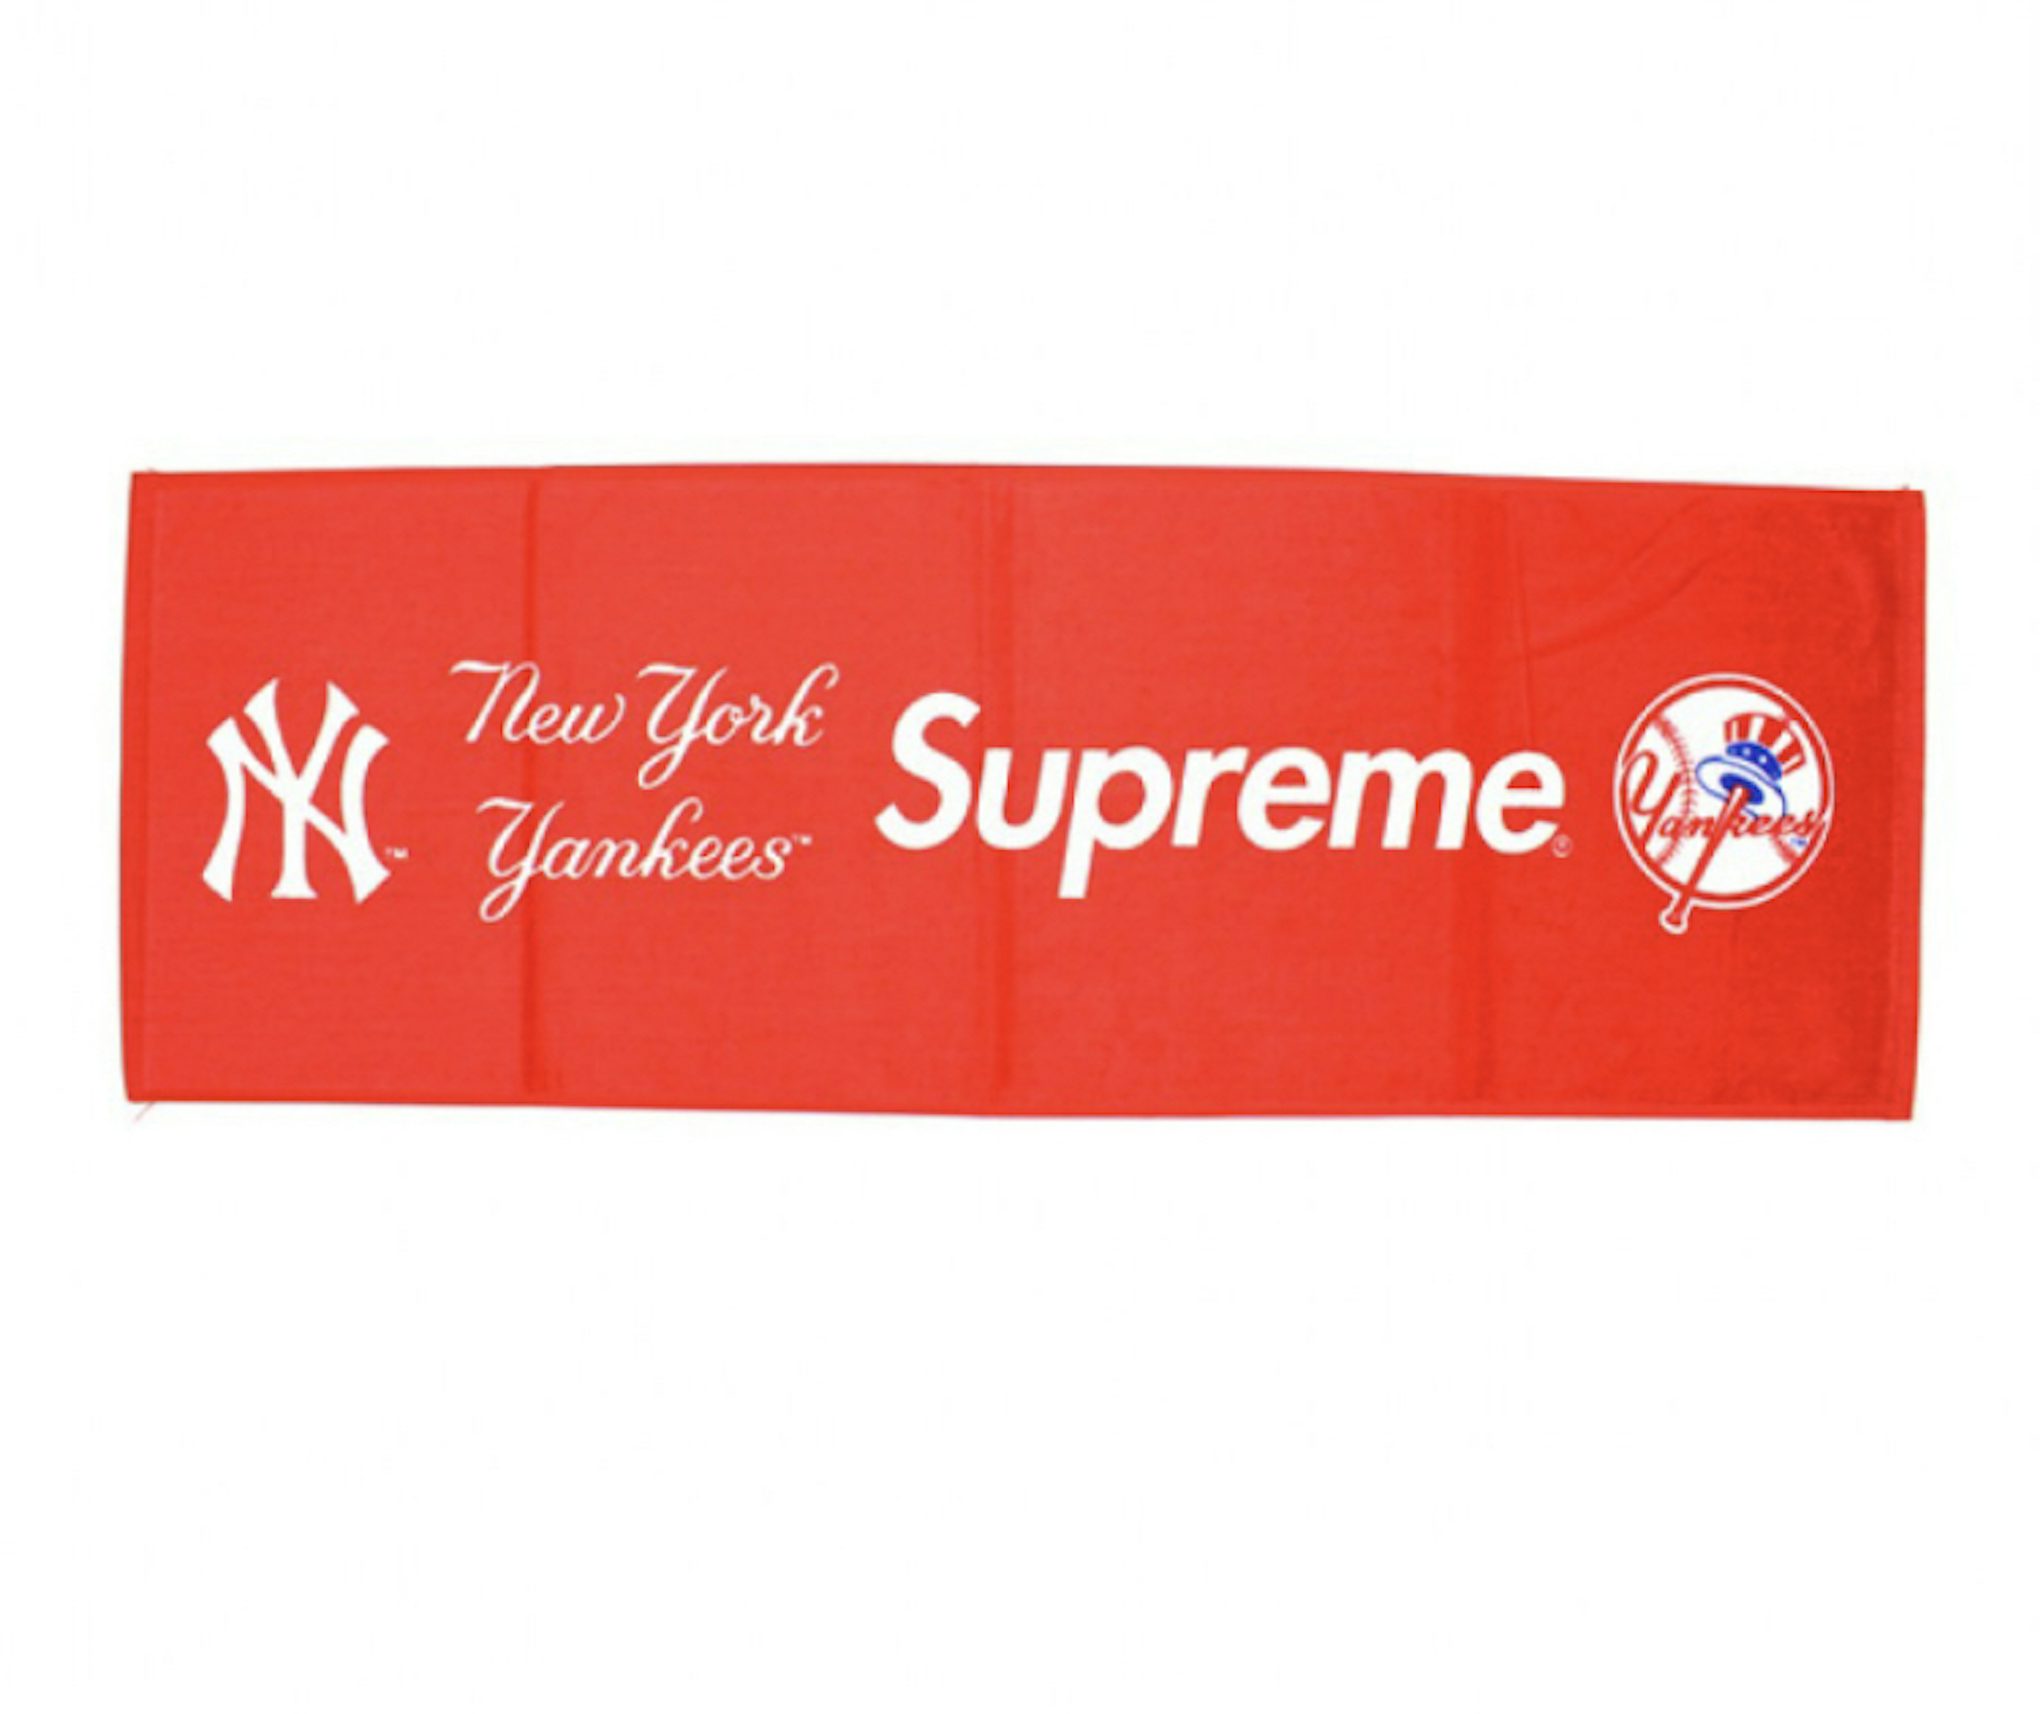 NEW YORK YANKEES X SUPREME RED iPhone 11 Case Cover